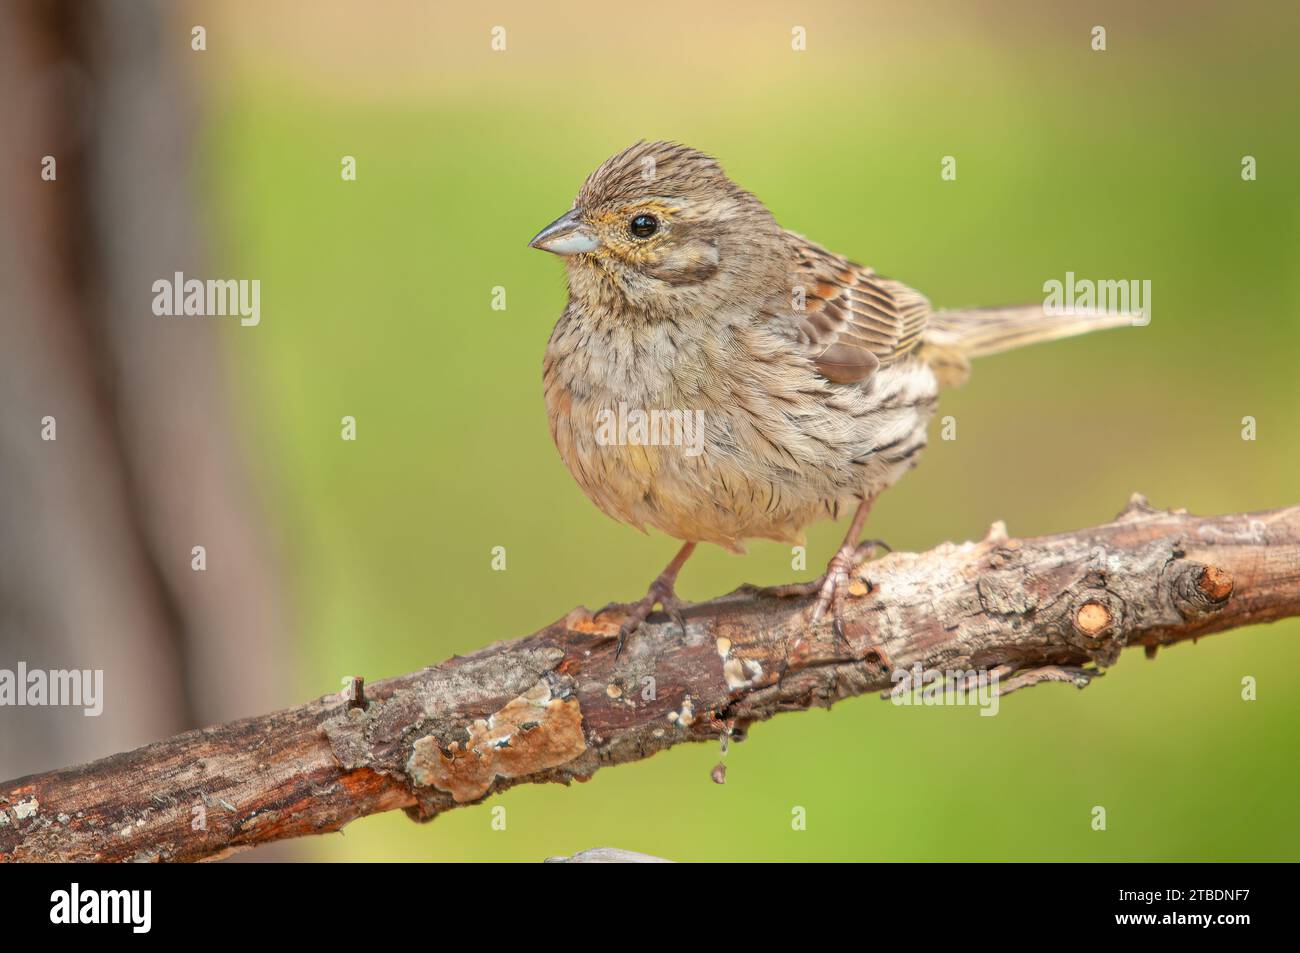 Cirl Bunting (Emberiza cirlus) on a branch. Blurred green background. Stock Photo